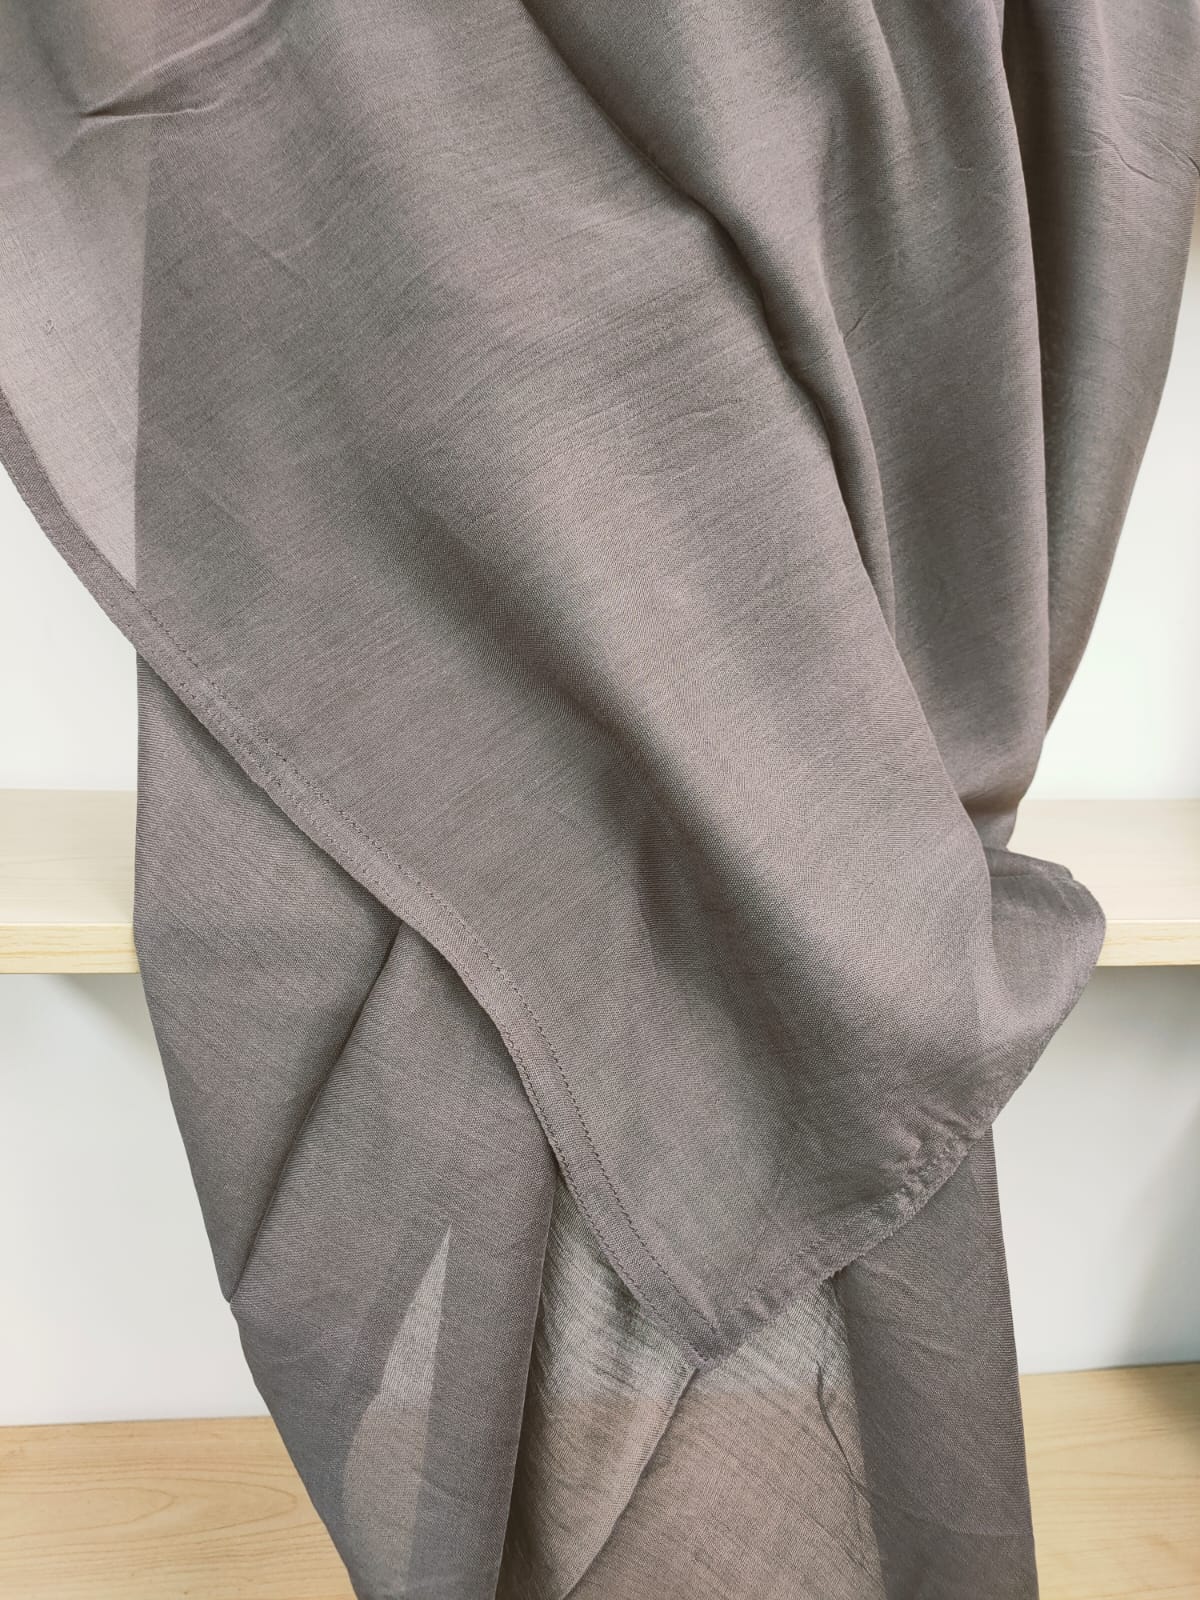 Introducing our sophisticated Modal Hijab in Smoke Grey, an elegant addition to your hijab collection, available at Hikmah Boutique! Carefully crafted from premium modal fabric, renowned for its luxurious softness and breathability, this modal hijab ensures comfort and style all day. Based in Australia, Deliver Worldwide.